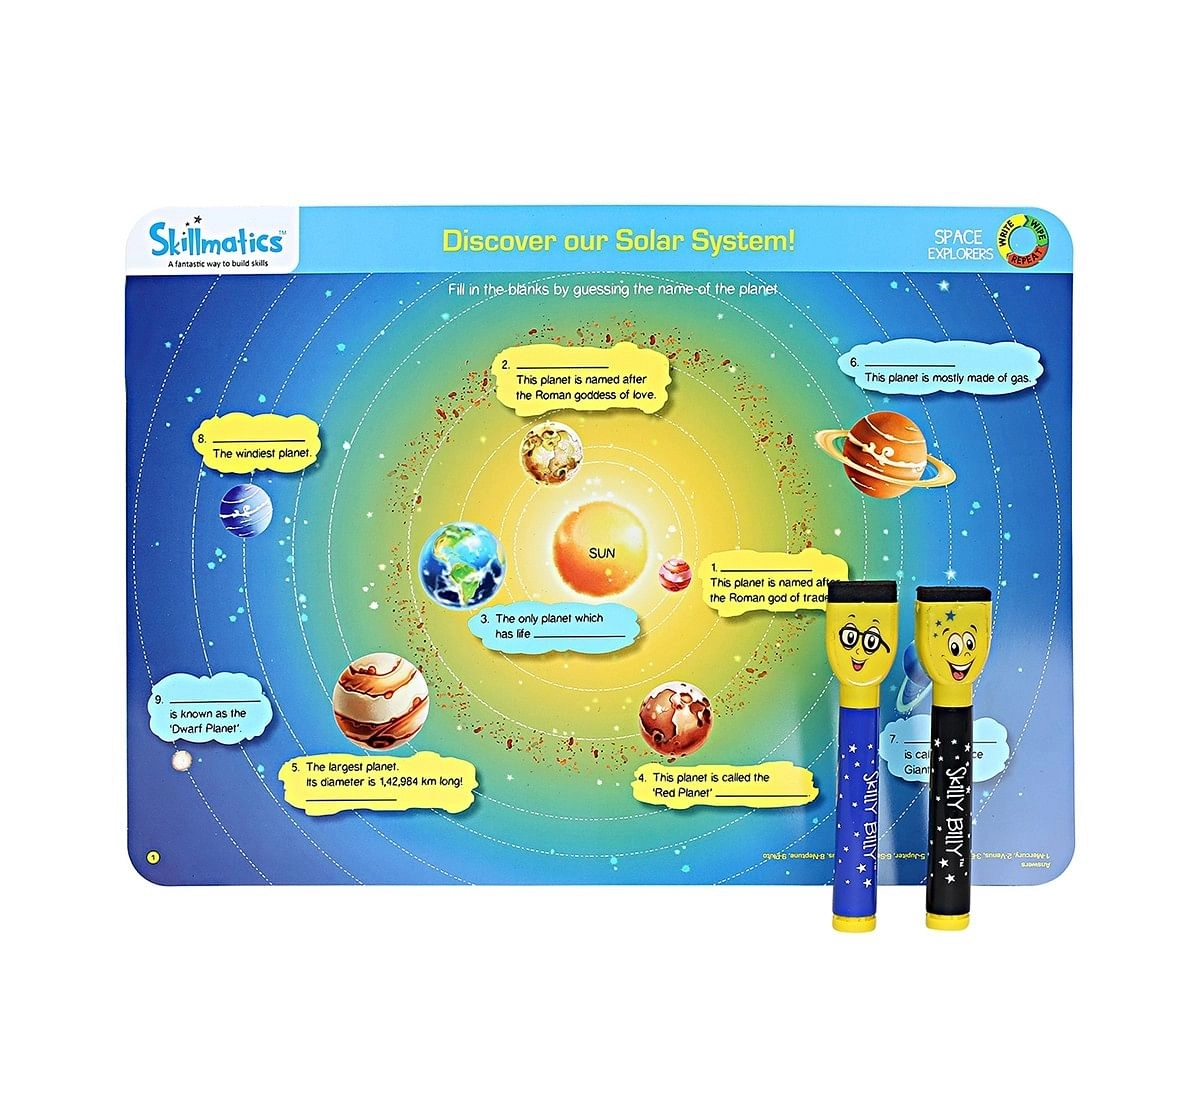  Skillmatics Educational Game Space Explorers 6-9 Years, Multi Color Games for Kids age 6Y+ 